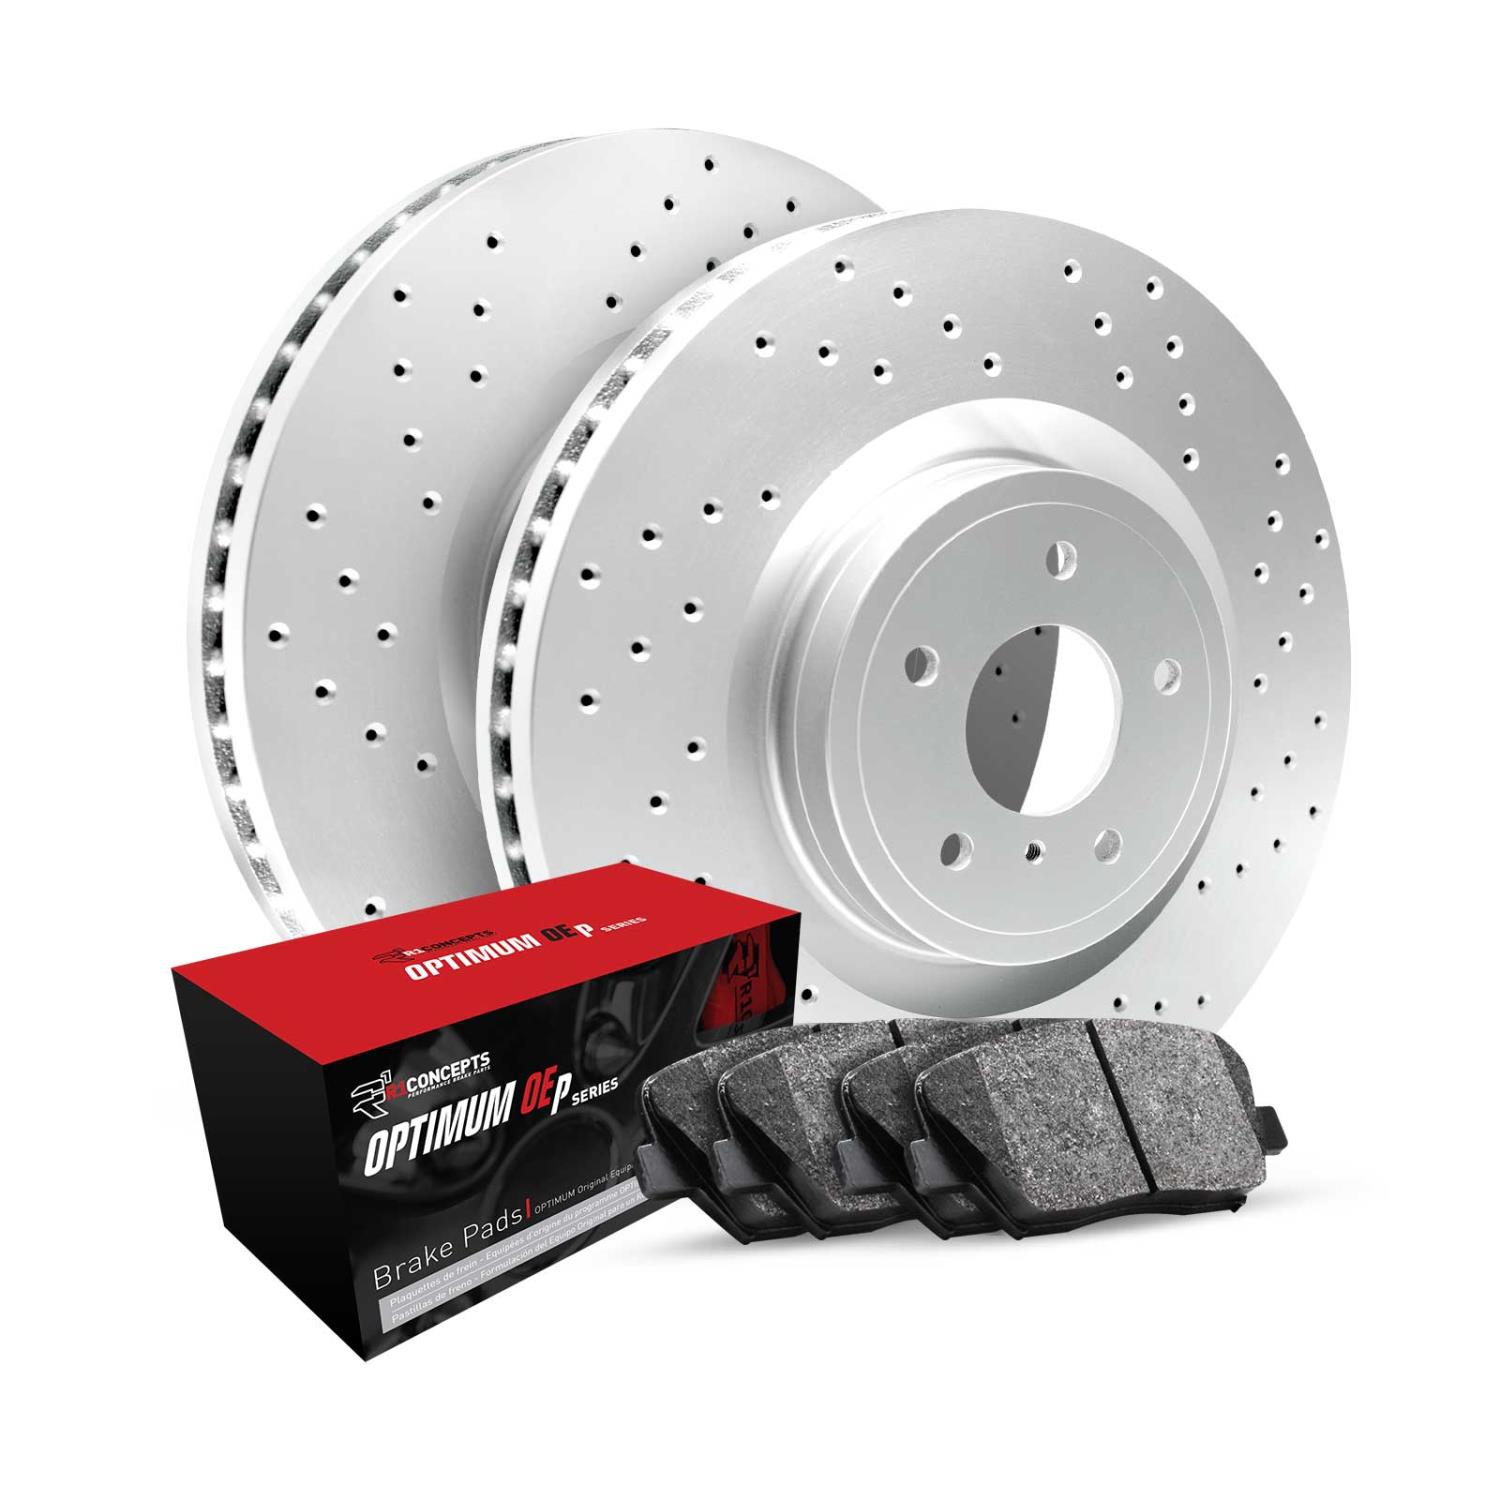 GEO-Carbon Drilled Brake Rotor Set w/Optimum OE Pads, 2009-2013 Fits Multiple Makes/Models, Position: Rear